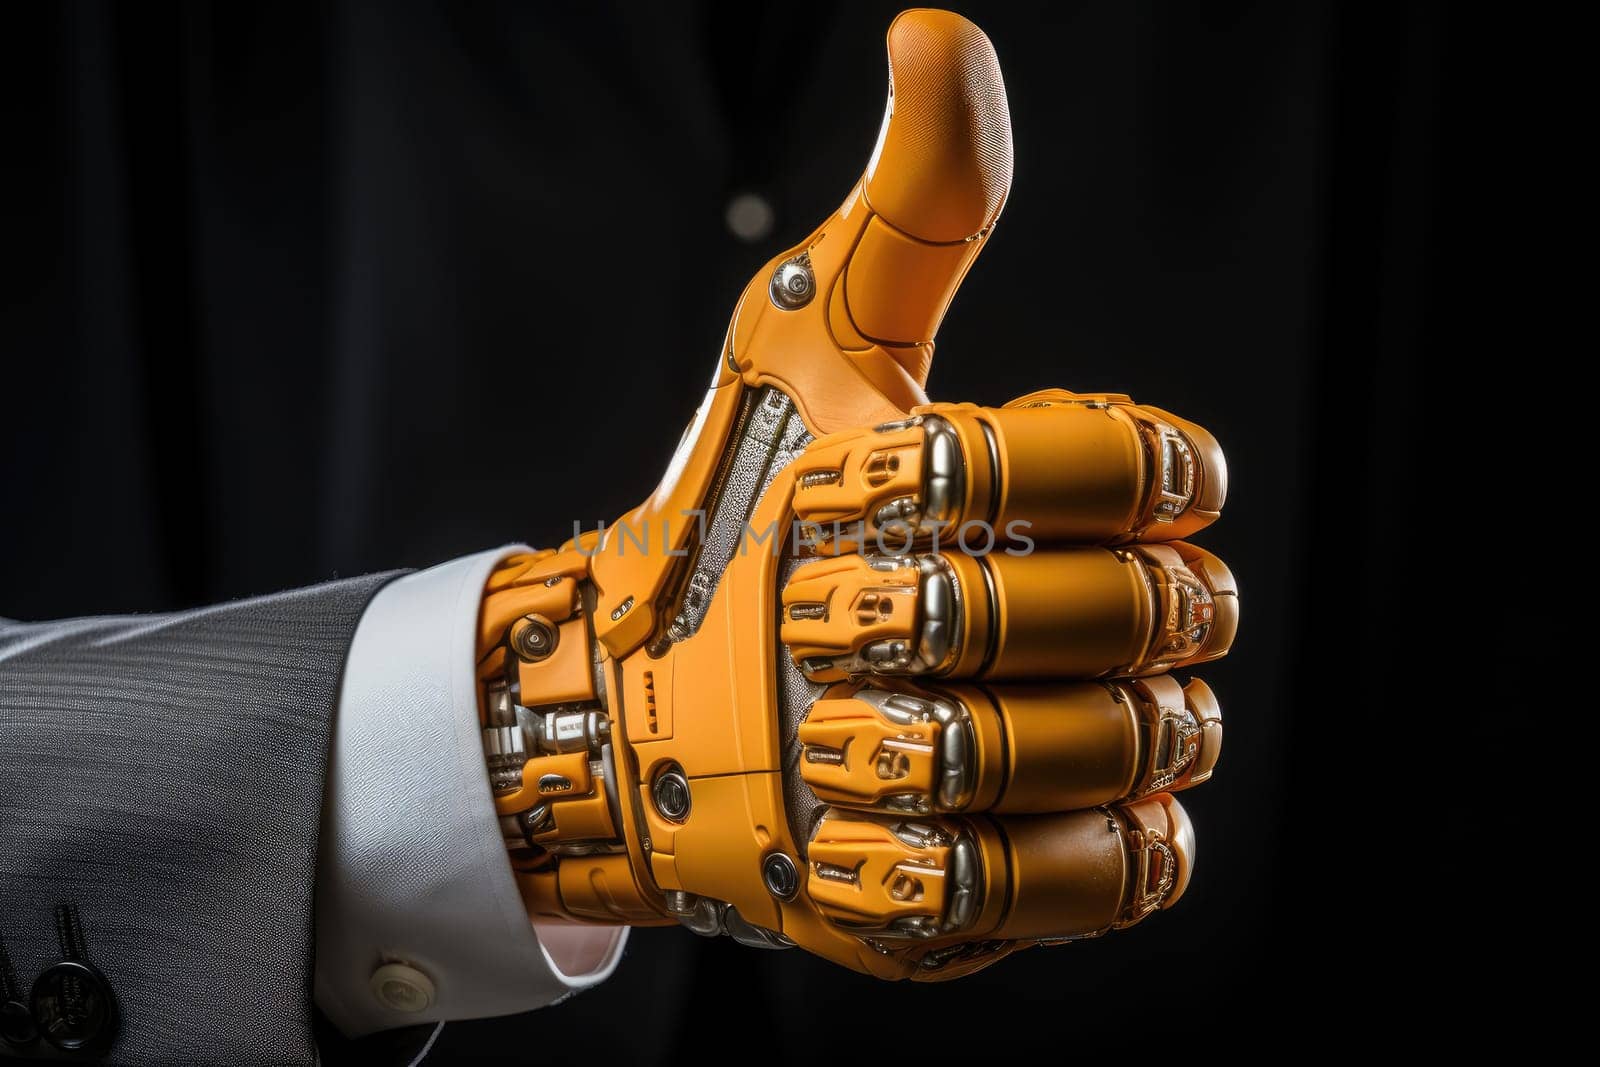 AI Robot Hand with Gesture of Recognition by Yurich32